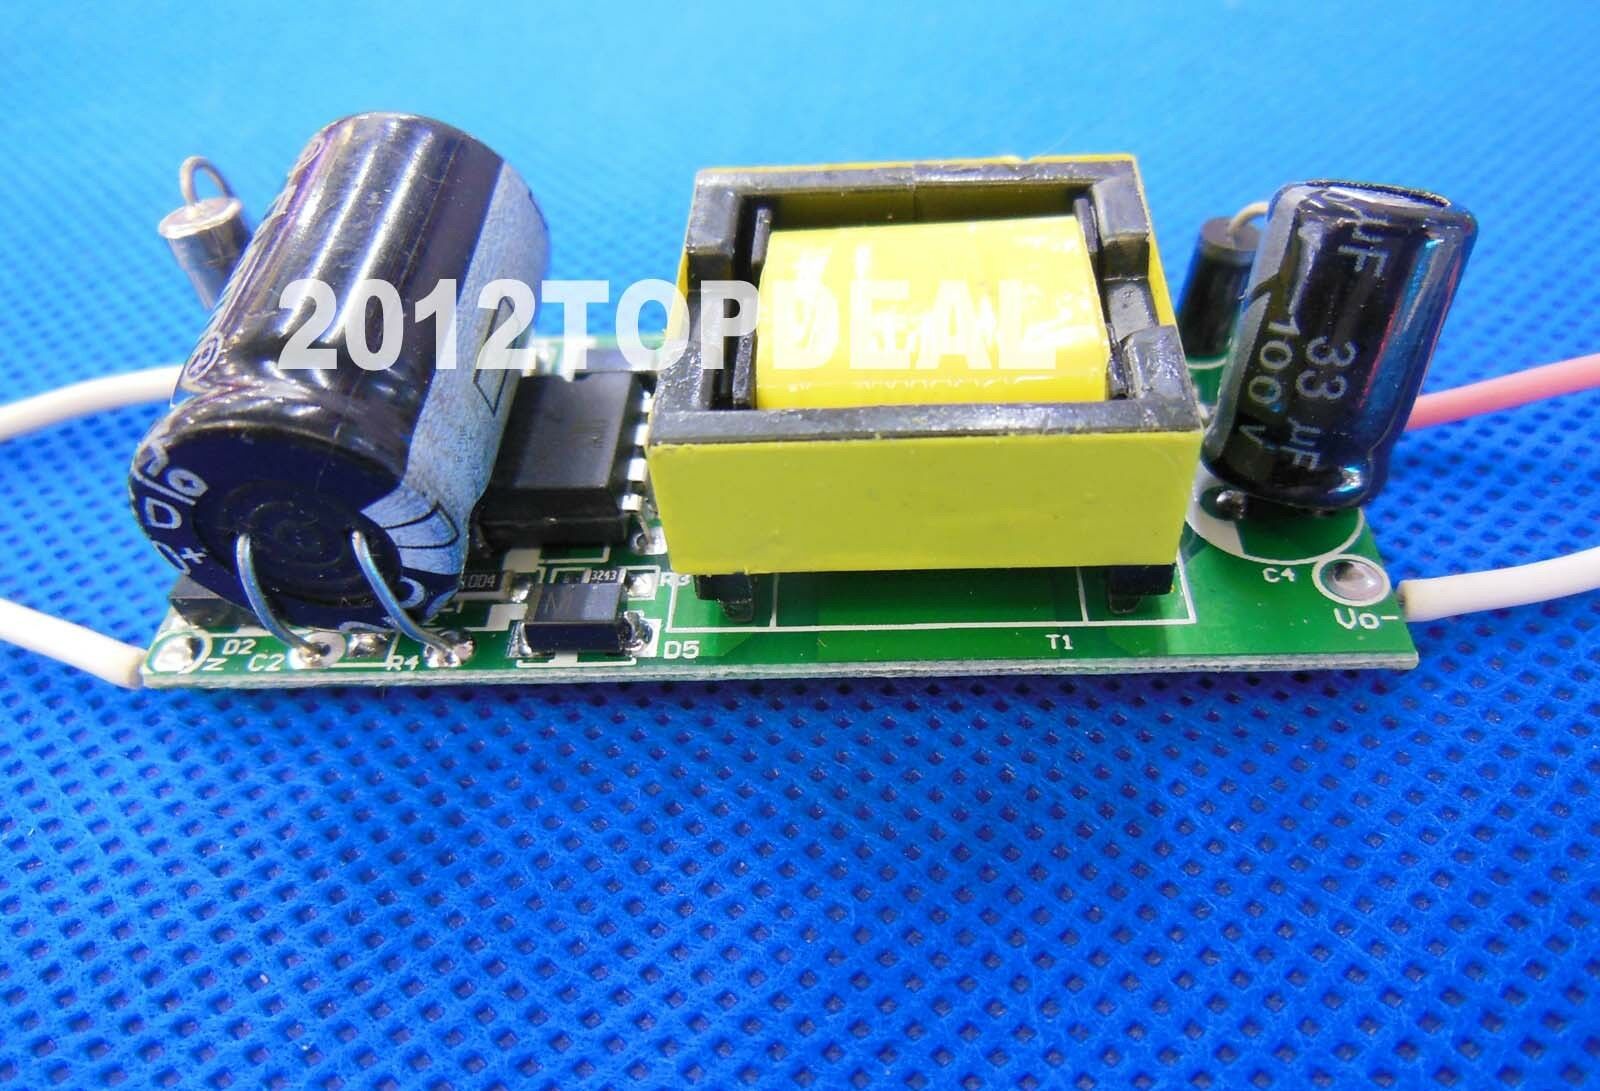 1pc 300ma 12-18x1w Constant Current Led Light Driver Power Supply Ac85-265v